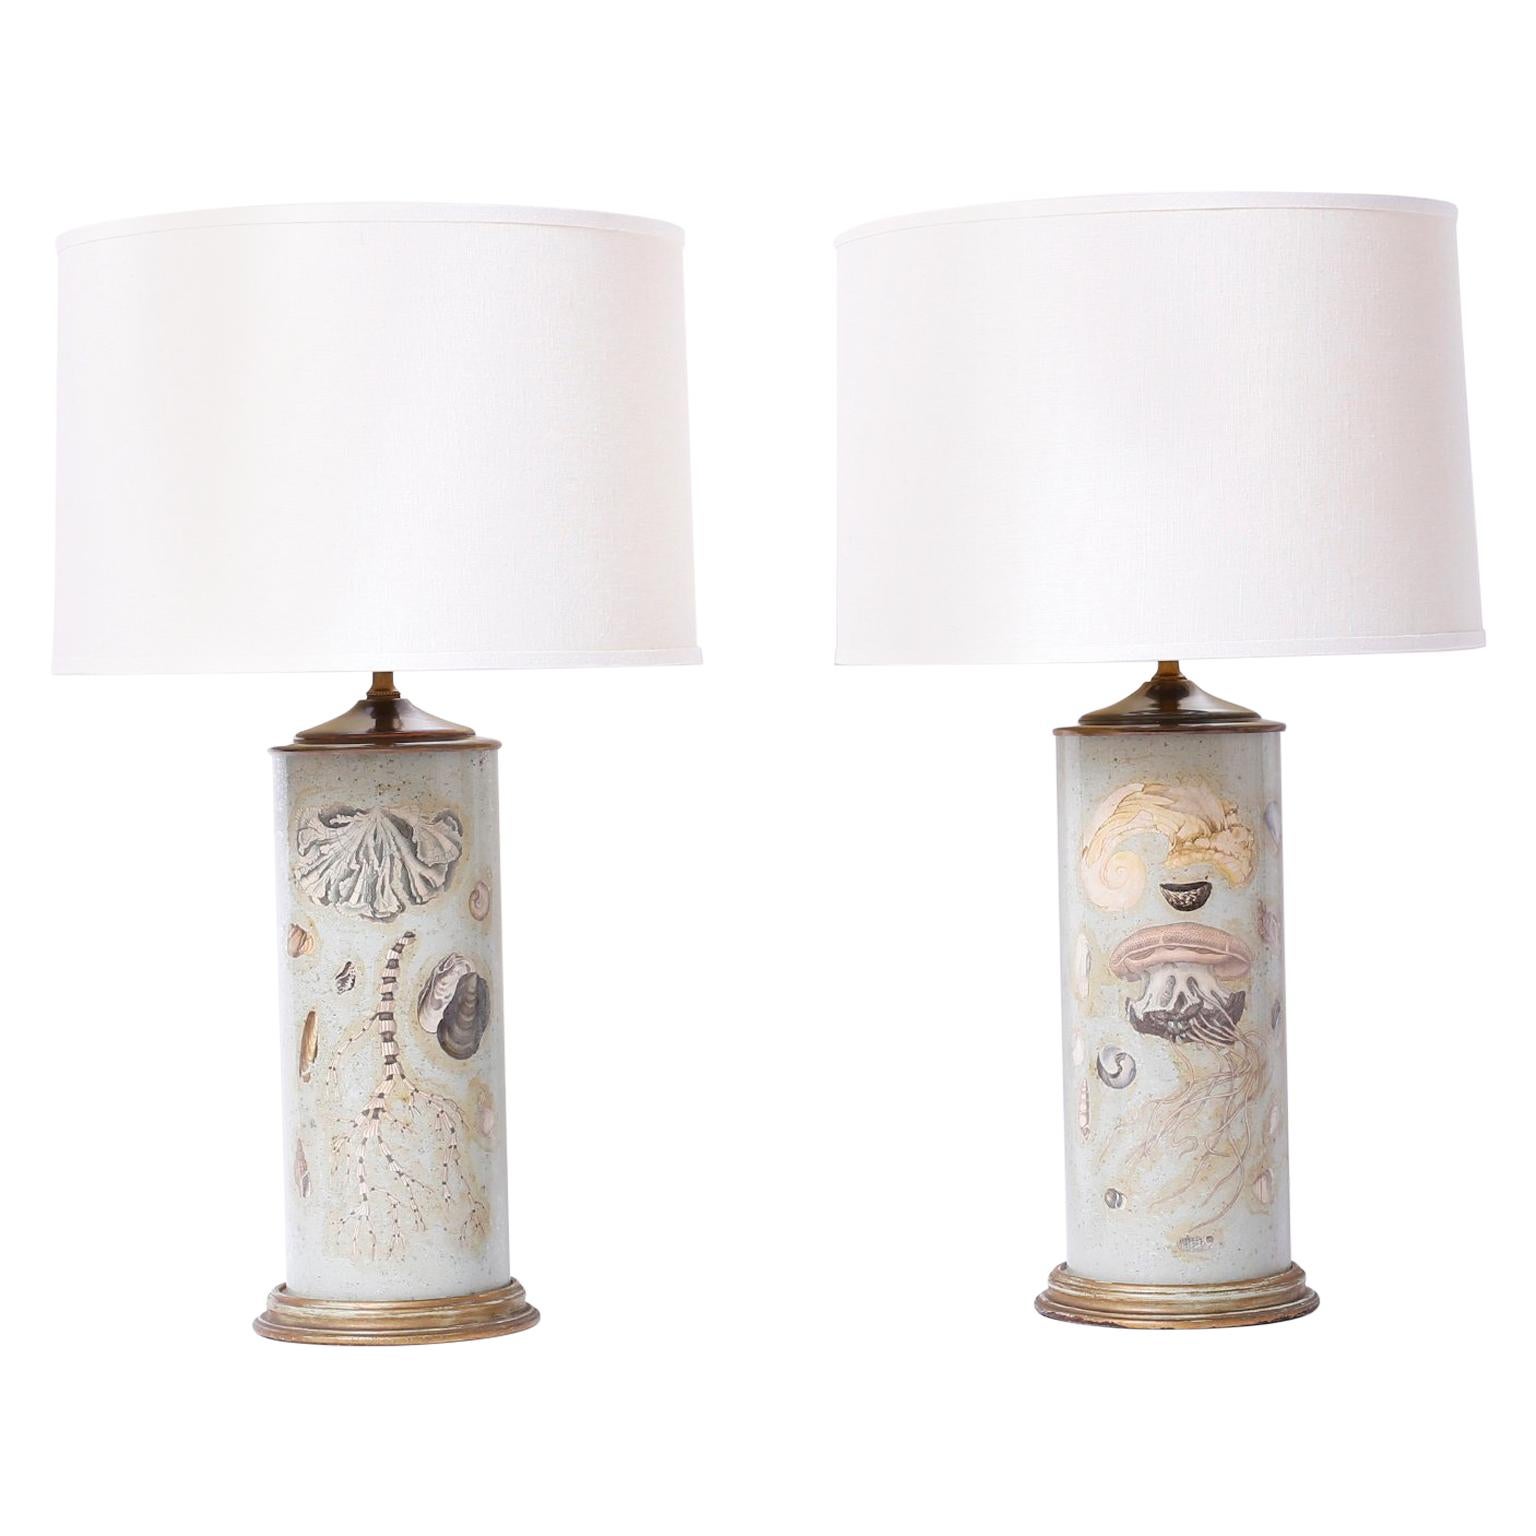 Pair of Marine Life Themed Table Lamps